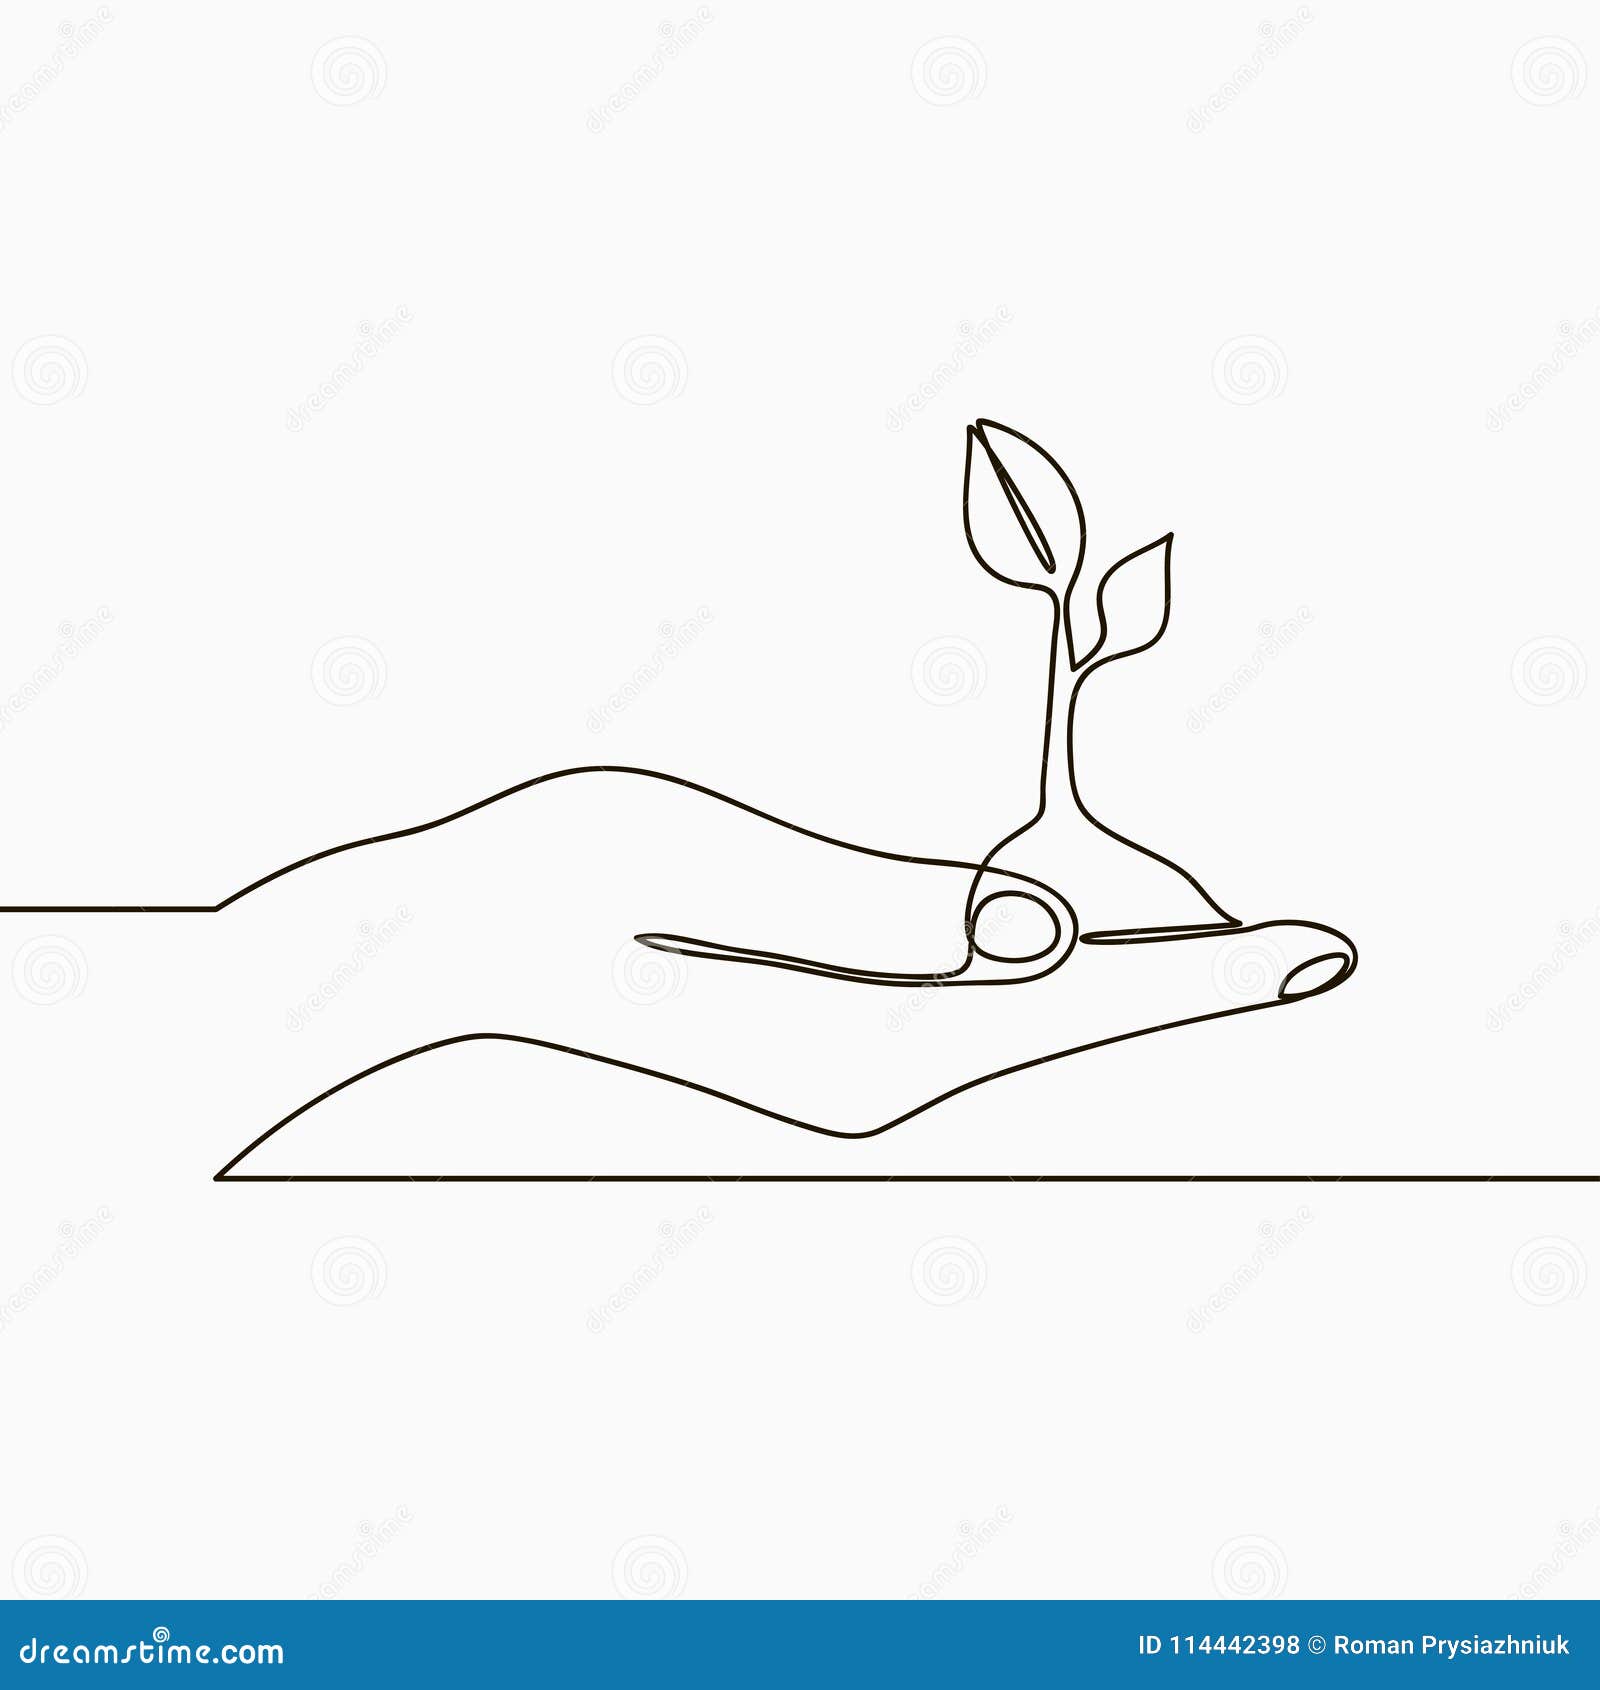 one line drawing of sprout in hand. continuous line growing plant in hand palm. hand-drawn .